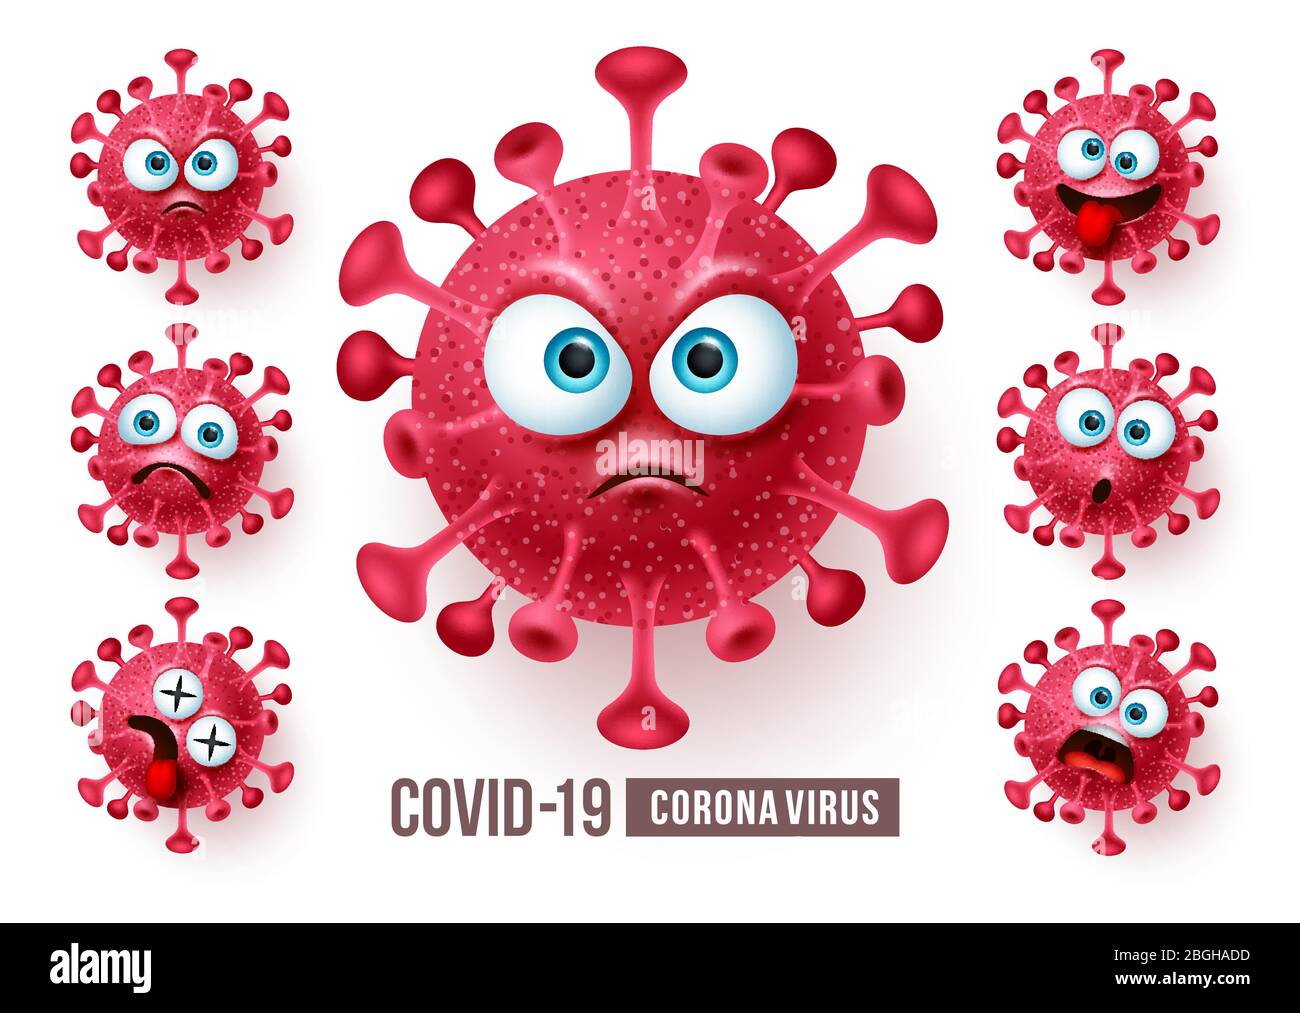 Corona virus covid19 emoji vector set. Covid19 corona virus emojis and emoticons with angry and scary faces for global pandemic outbreak. Stock Vector